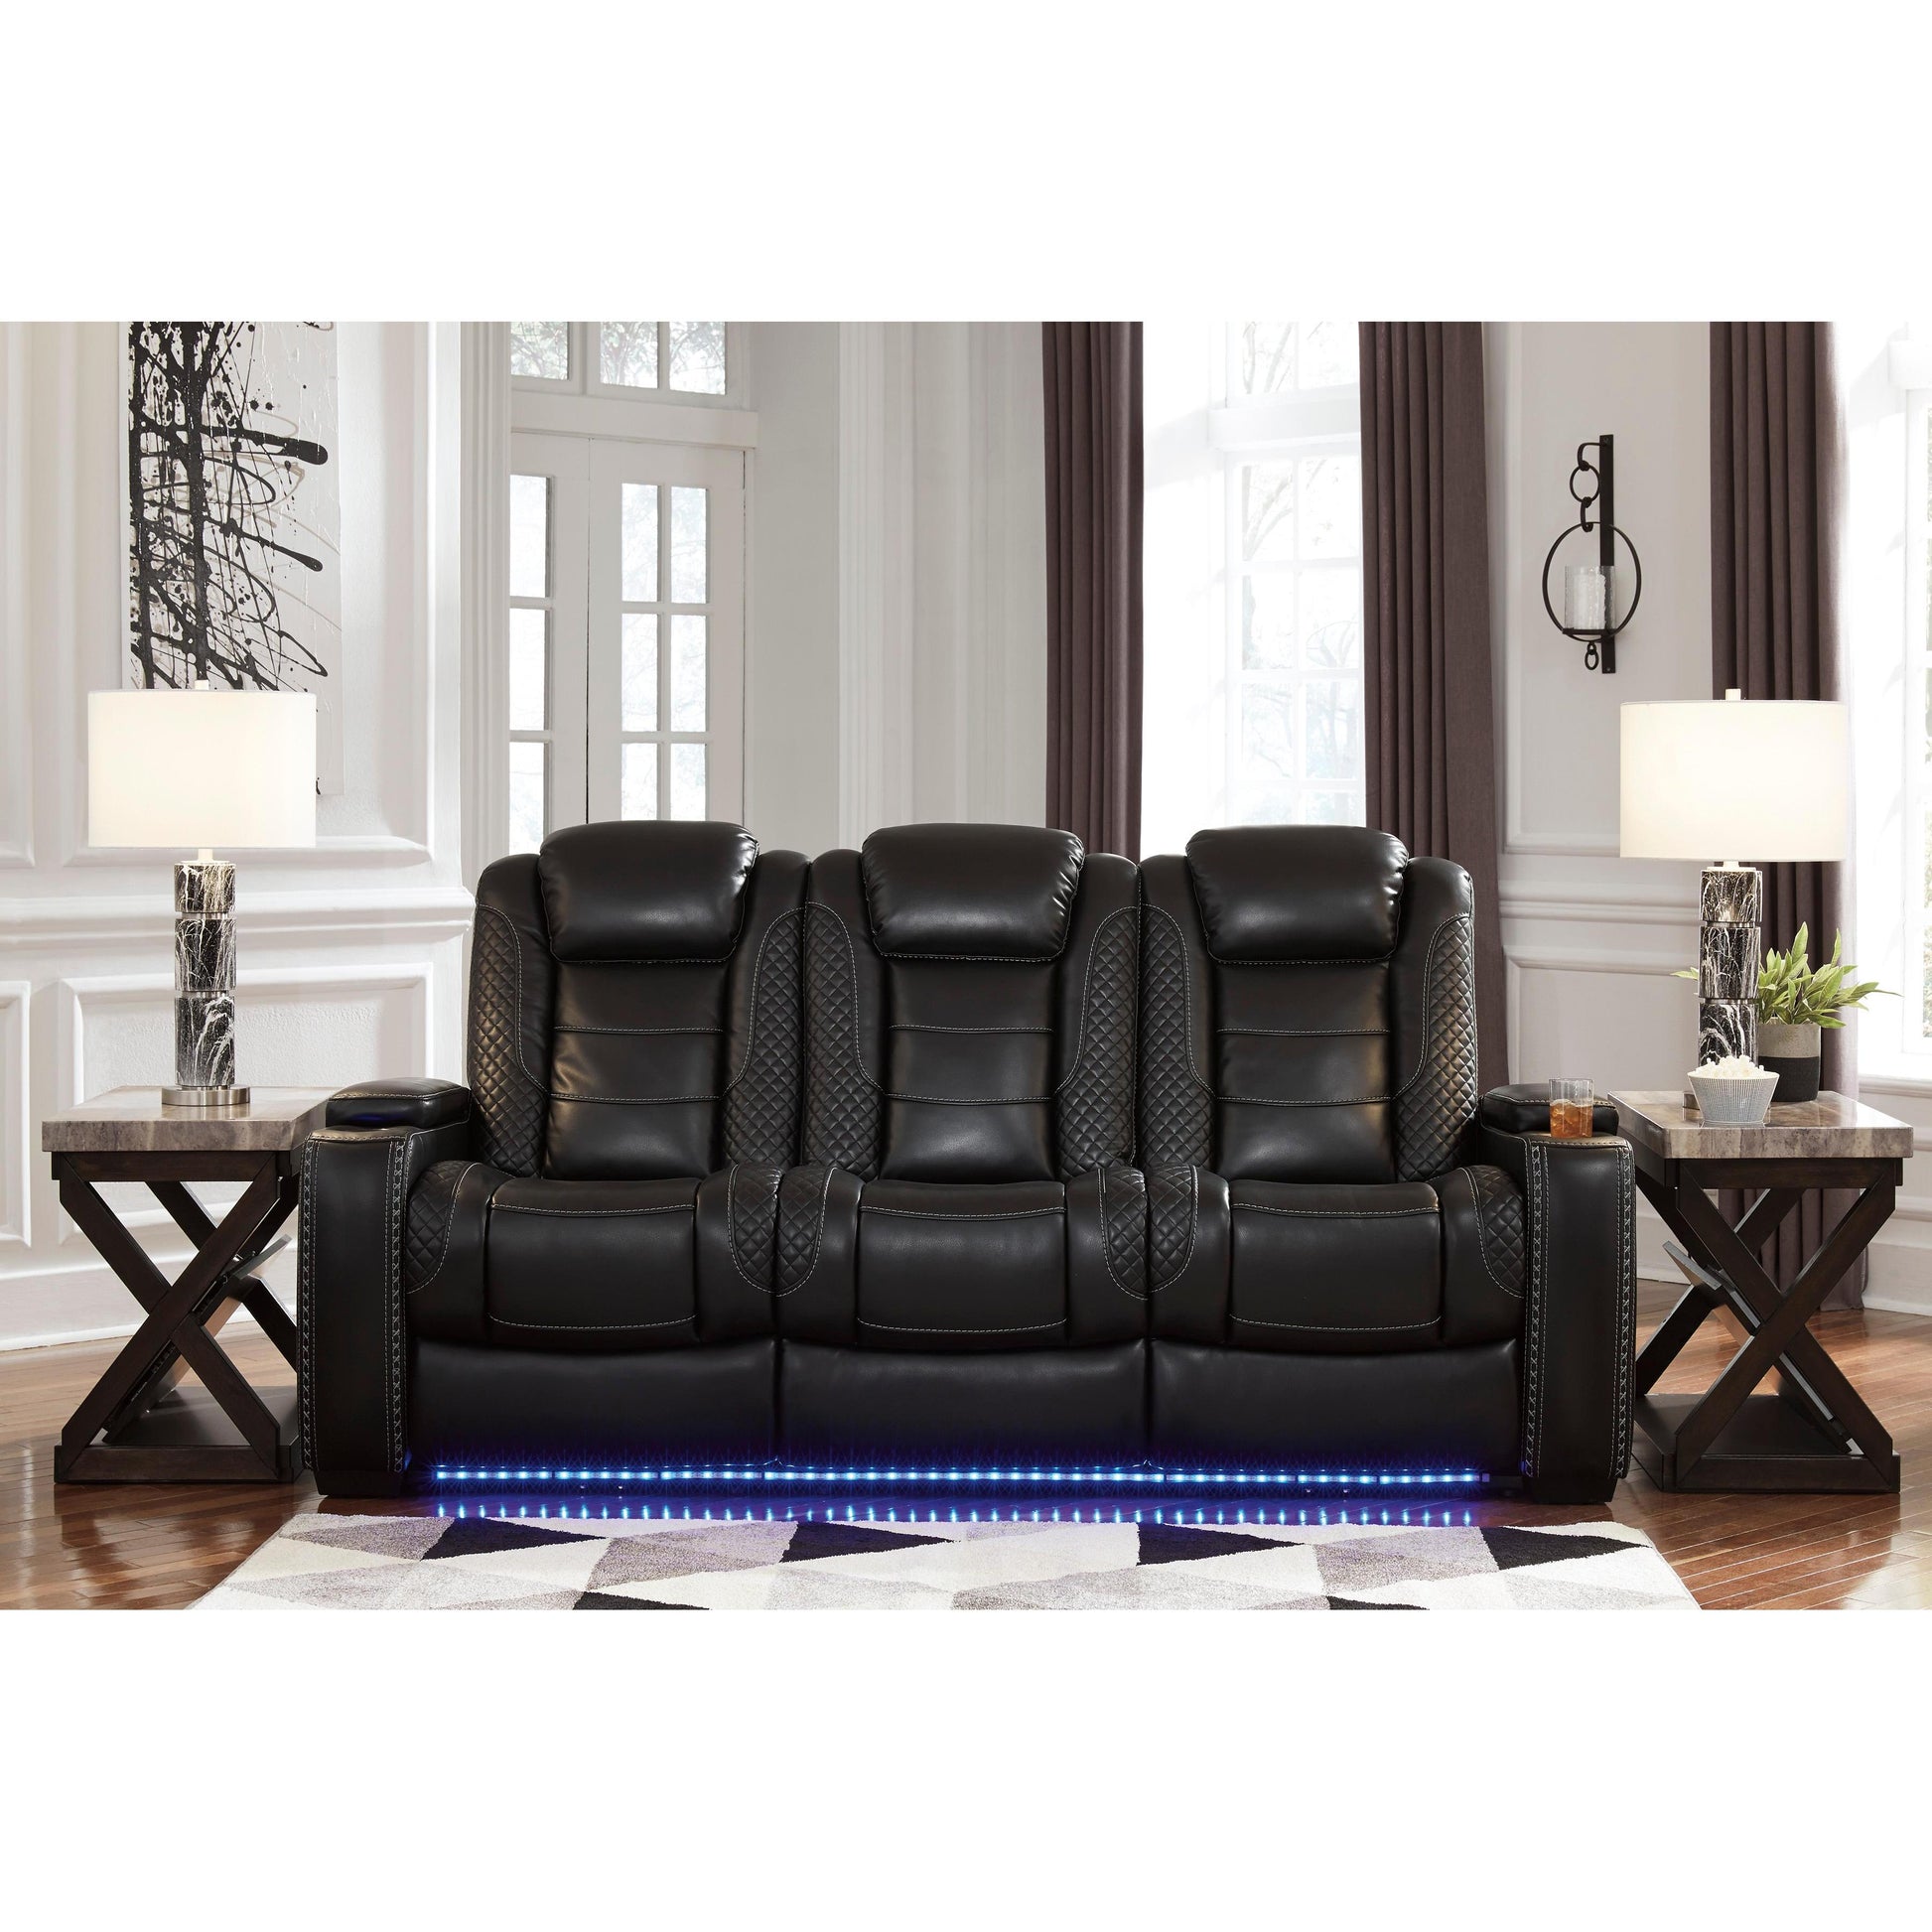 Signature Design by Ashley Party Time 37003 3 pc Power Reclining Living Room Set IMAGE 3